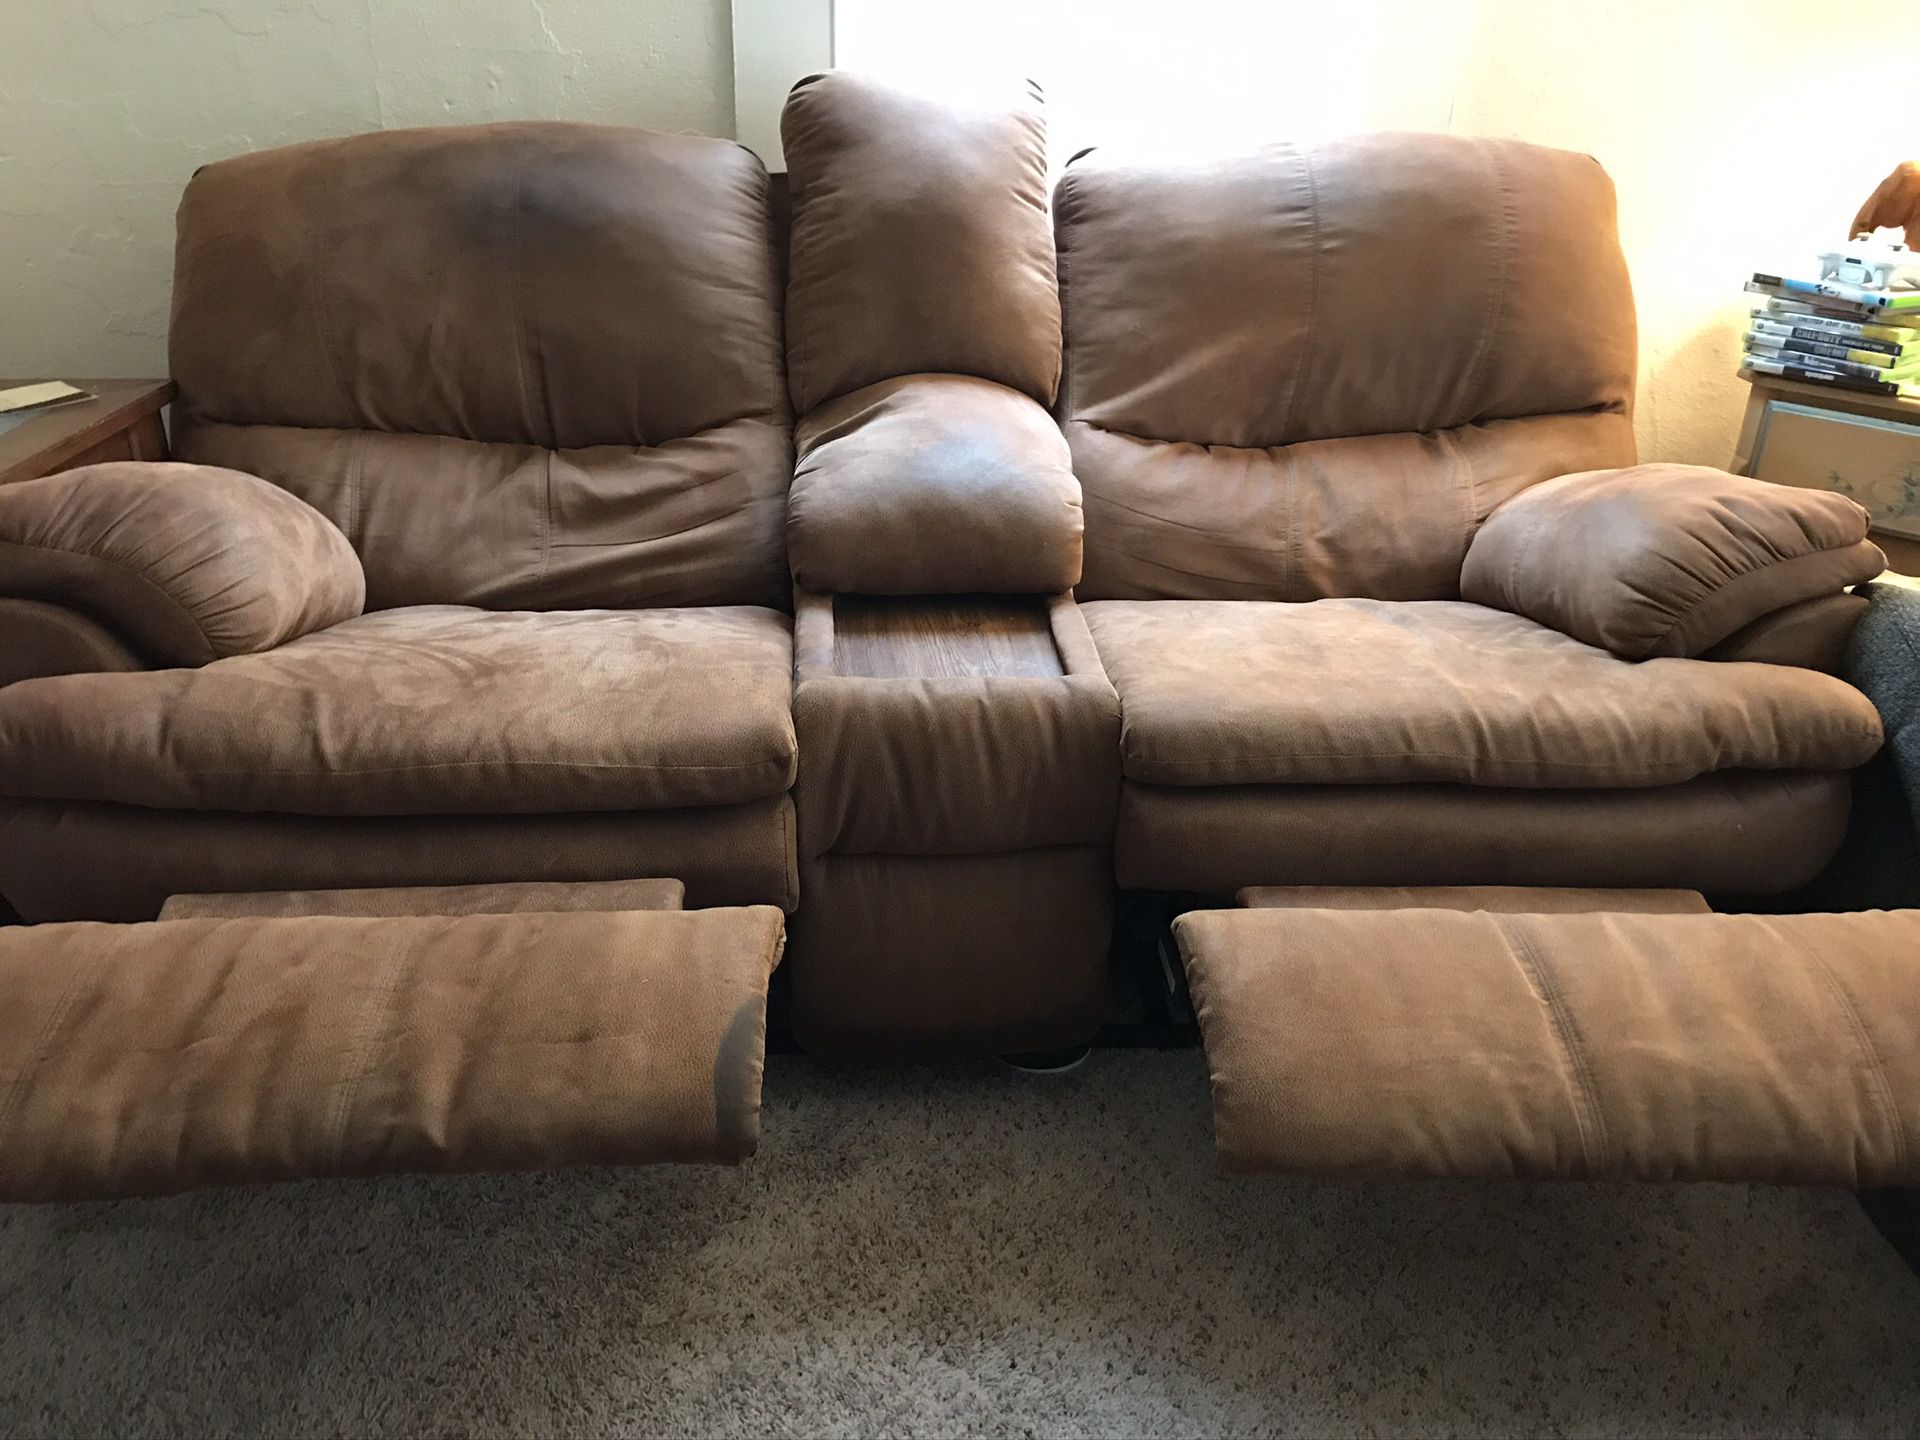 2 Free Couches